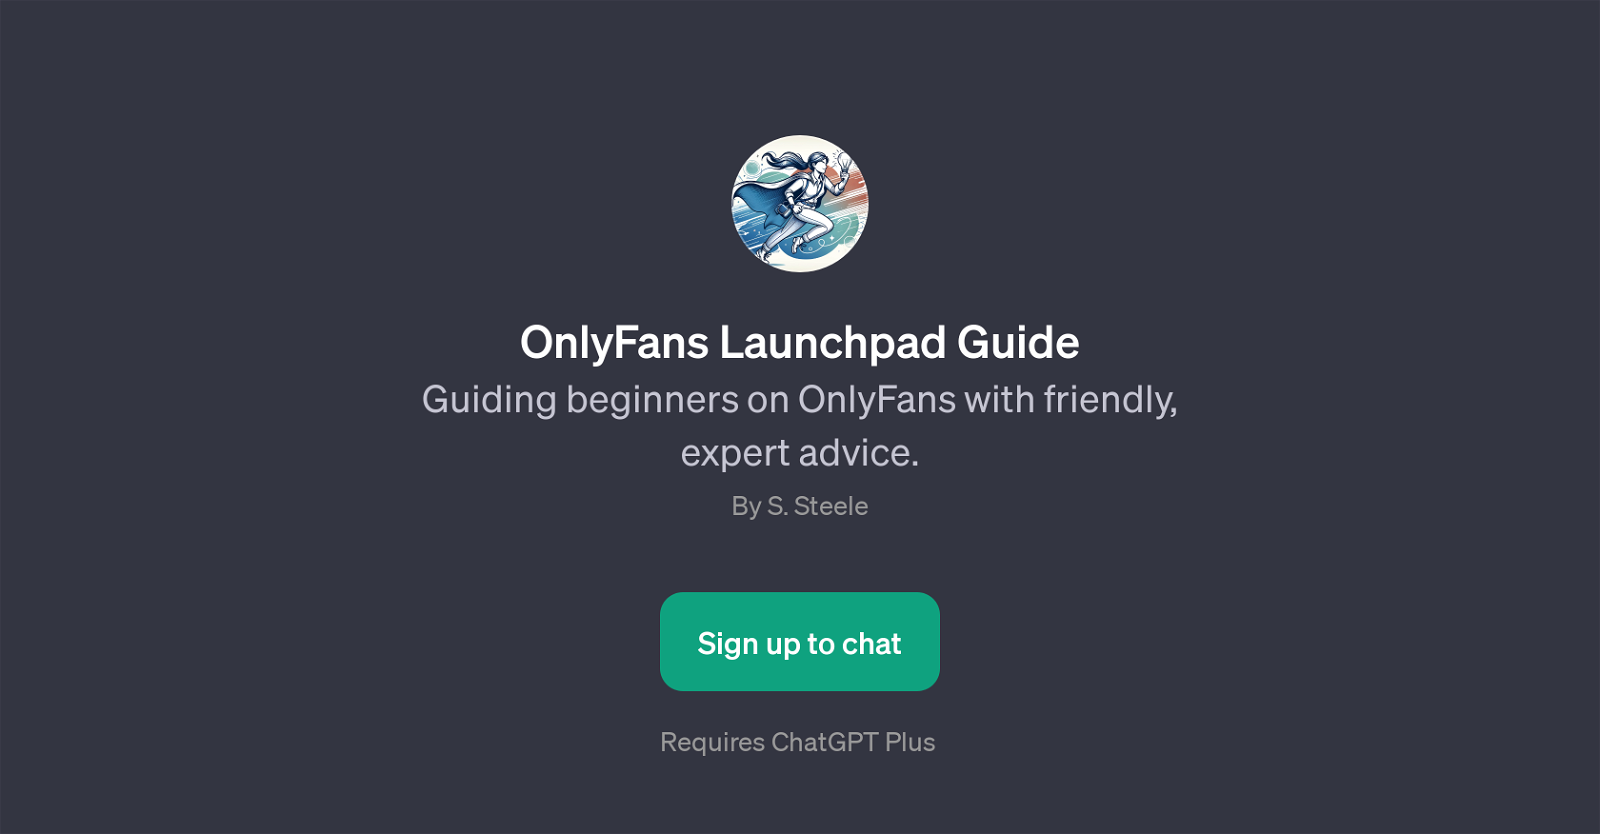 OnlyFans Launchpad Guide website